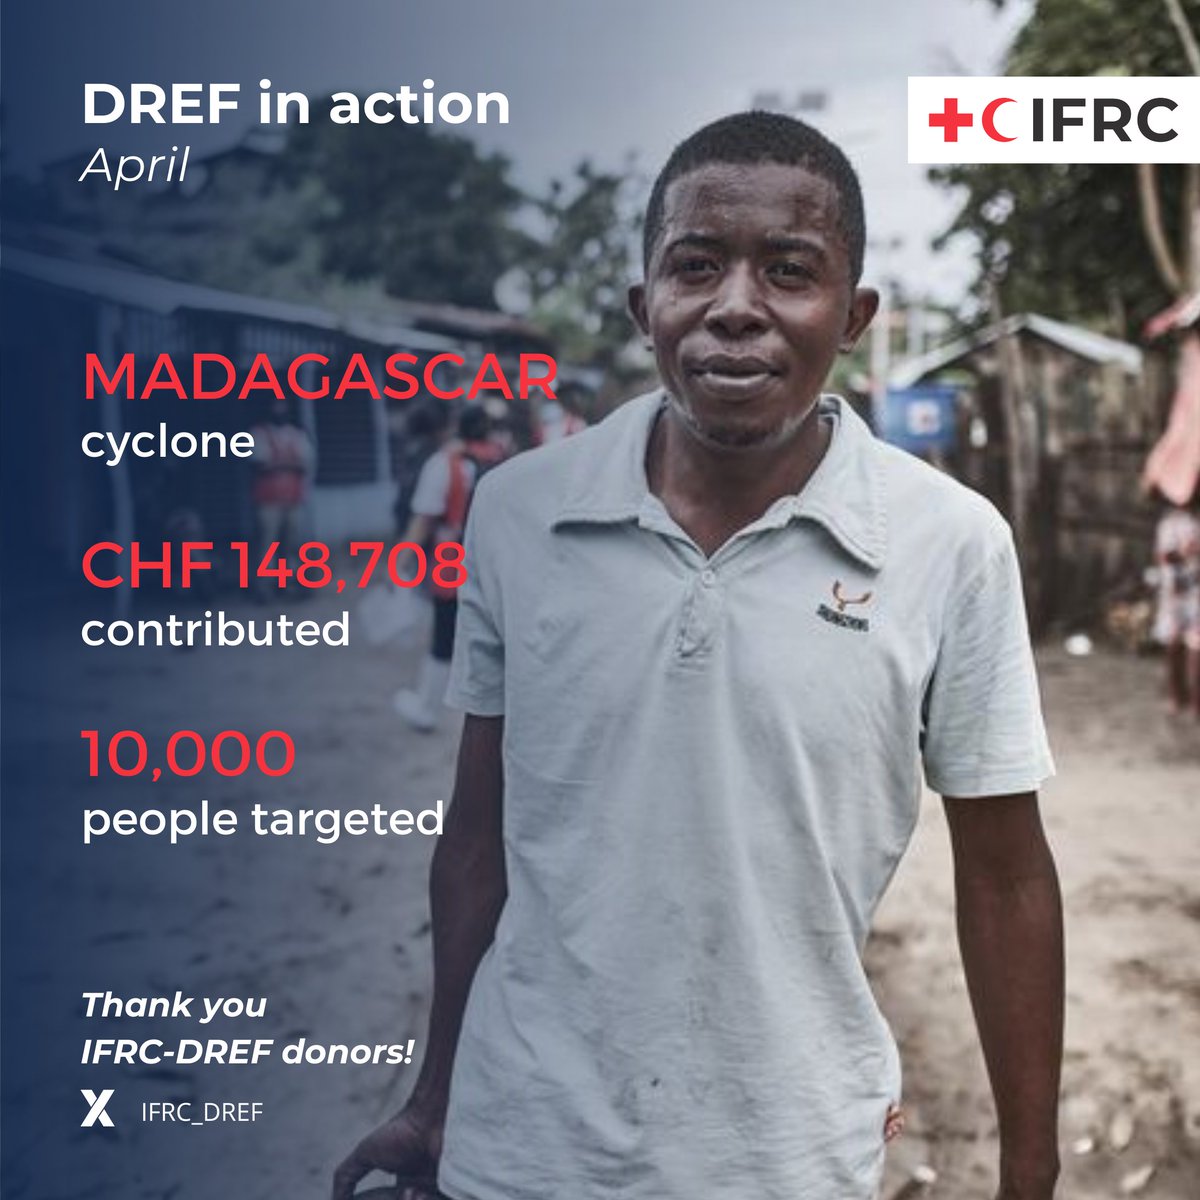 #DREFinAction Tropical Cyclone Gamane hit Madagascar, making landfall in the early morning at Ampisikinana, Vohémar, in the Sava Region. With the help of the IFRC-DREF, the @MadaRedCross will assist 10,000 vulnerable people by supporting immediate priorities related to WASH